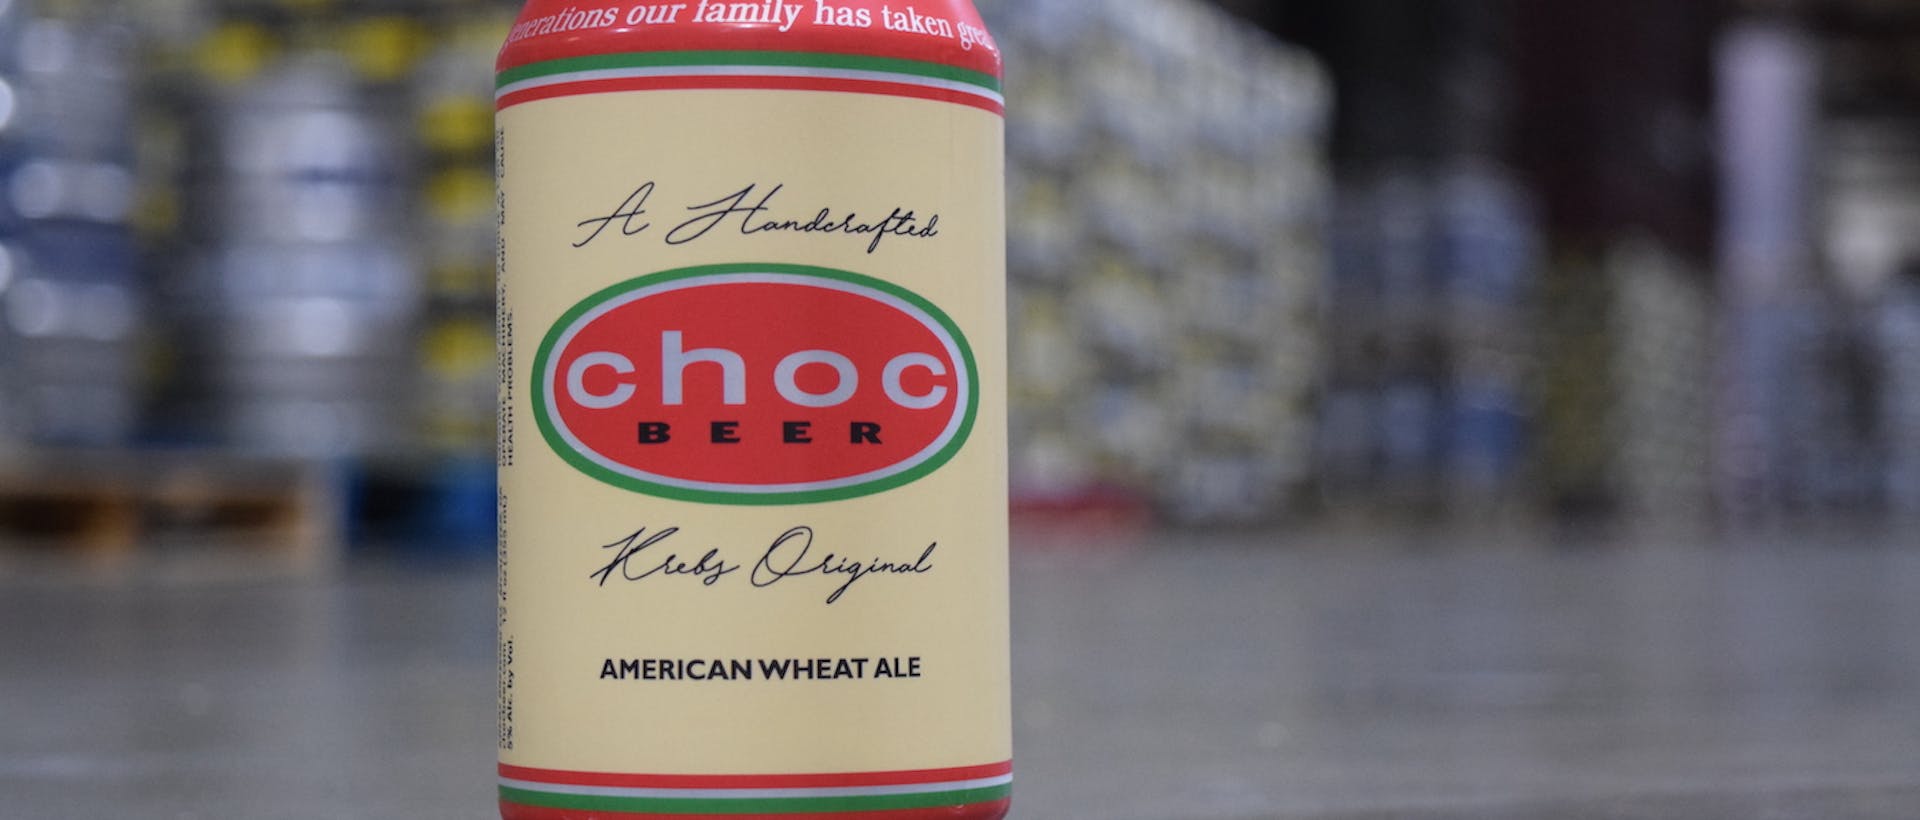 Can of beer - Choc beer American Wheat Ale